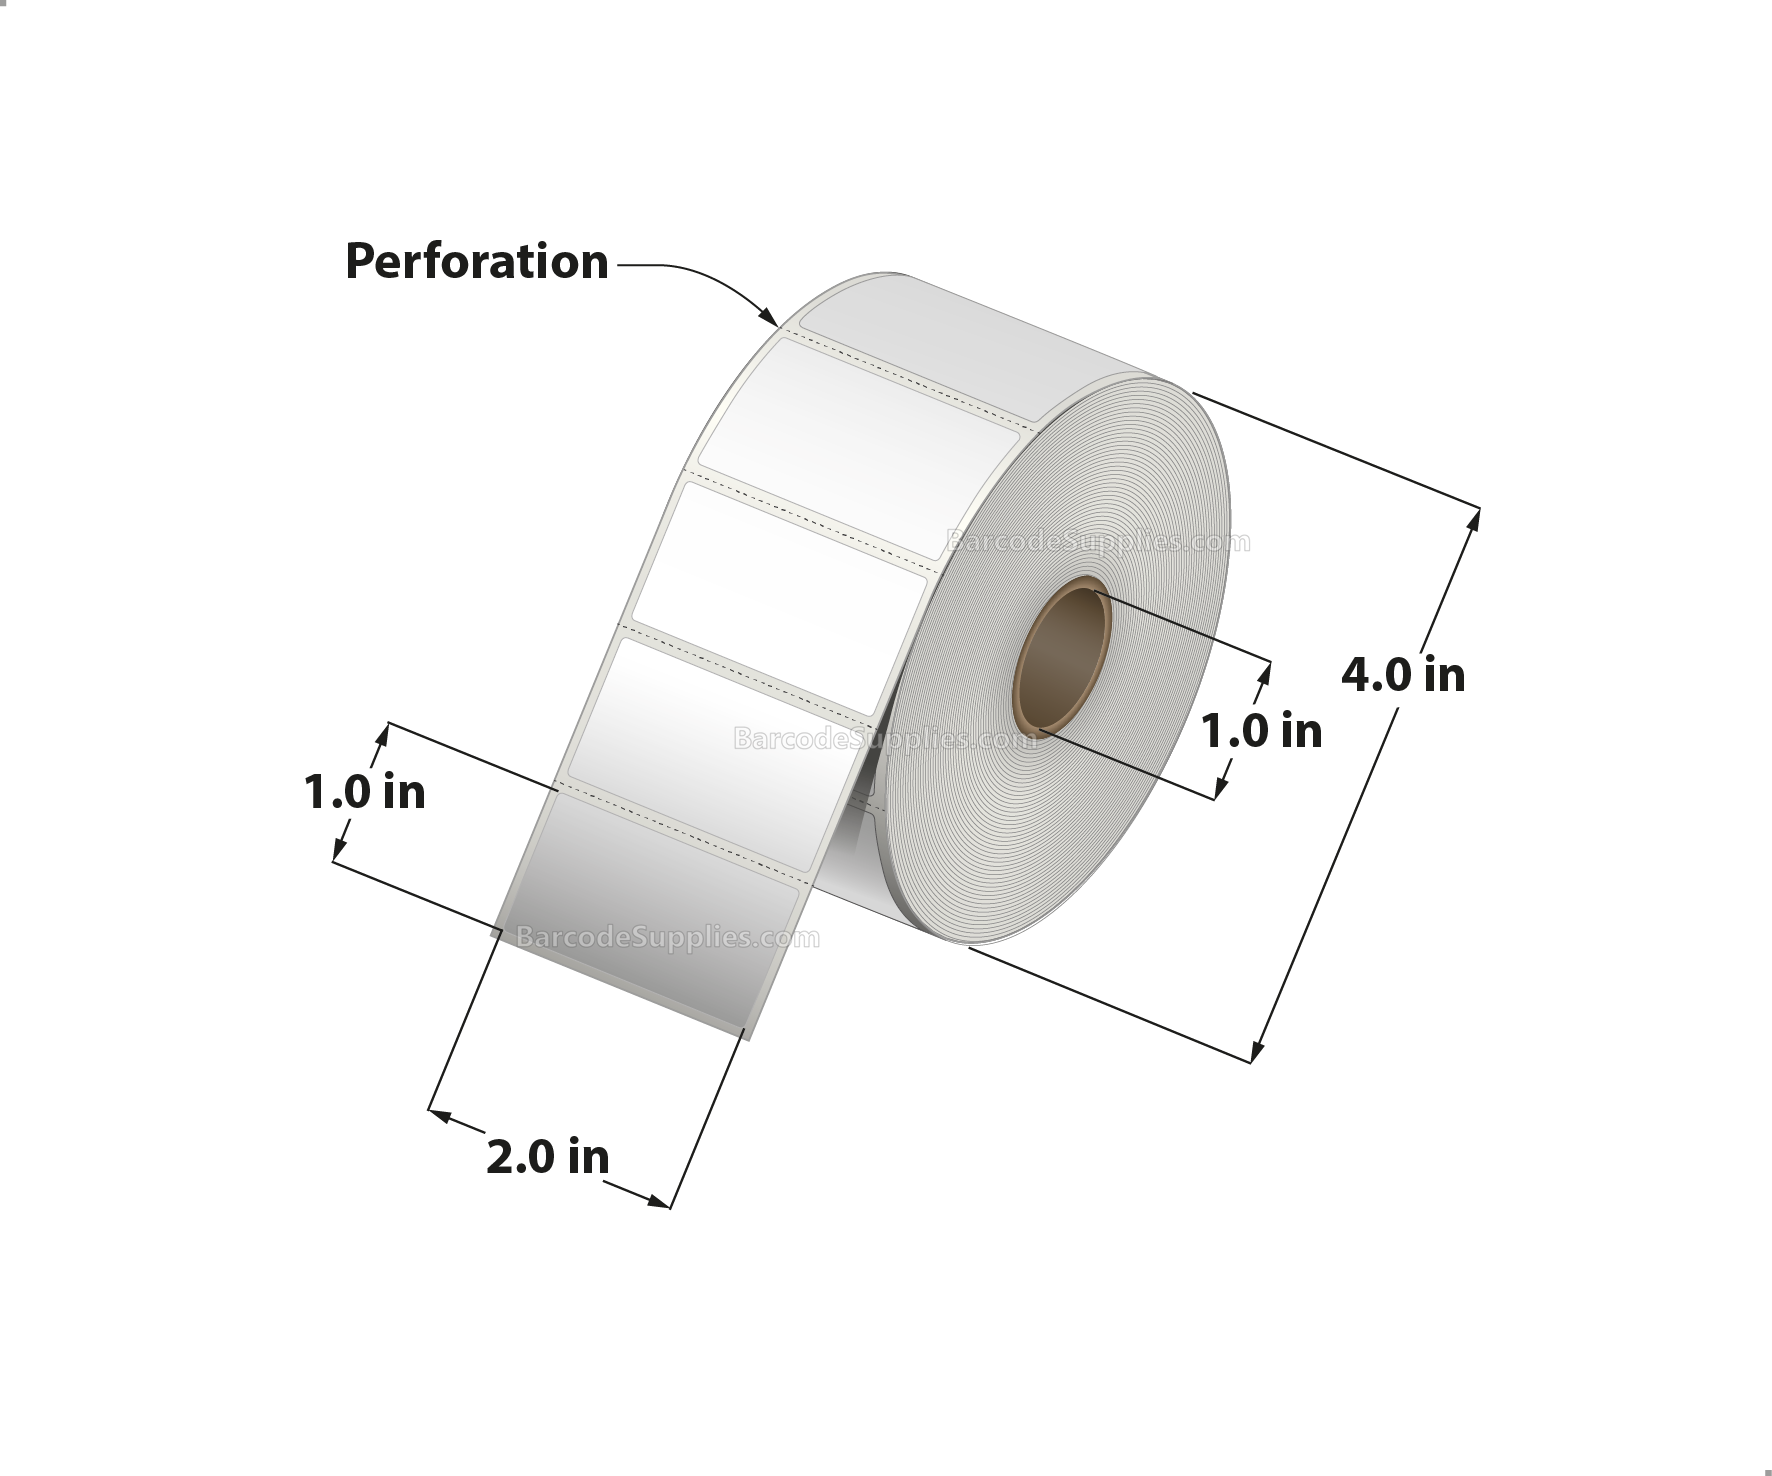 2 x 1 Thermal Transfer White Labels With Permanent Acrylic Adhesive - Perforated - 1400 Labels Per Roll - Carton Of 4 Rolls - 5600 Labels Total - MPN: TH21-14PTT